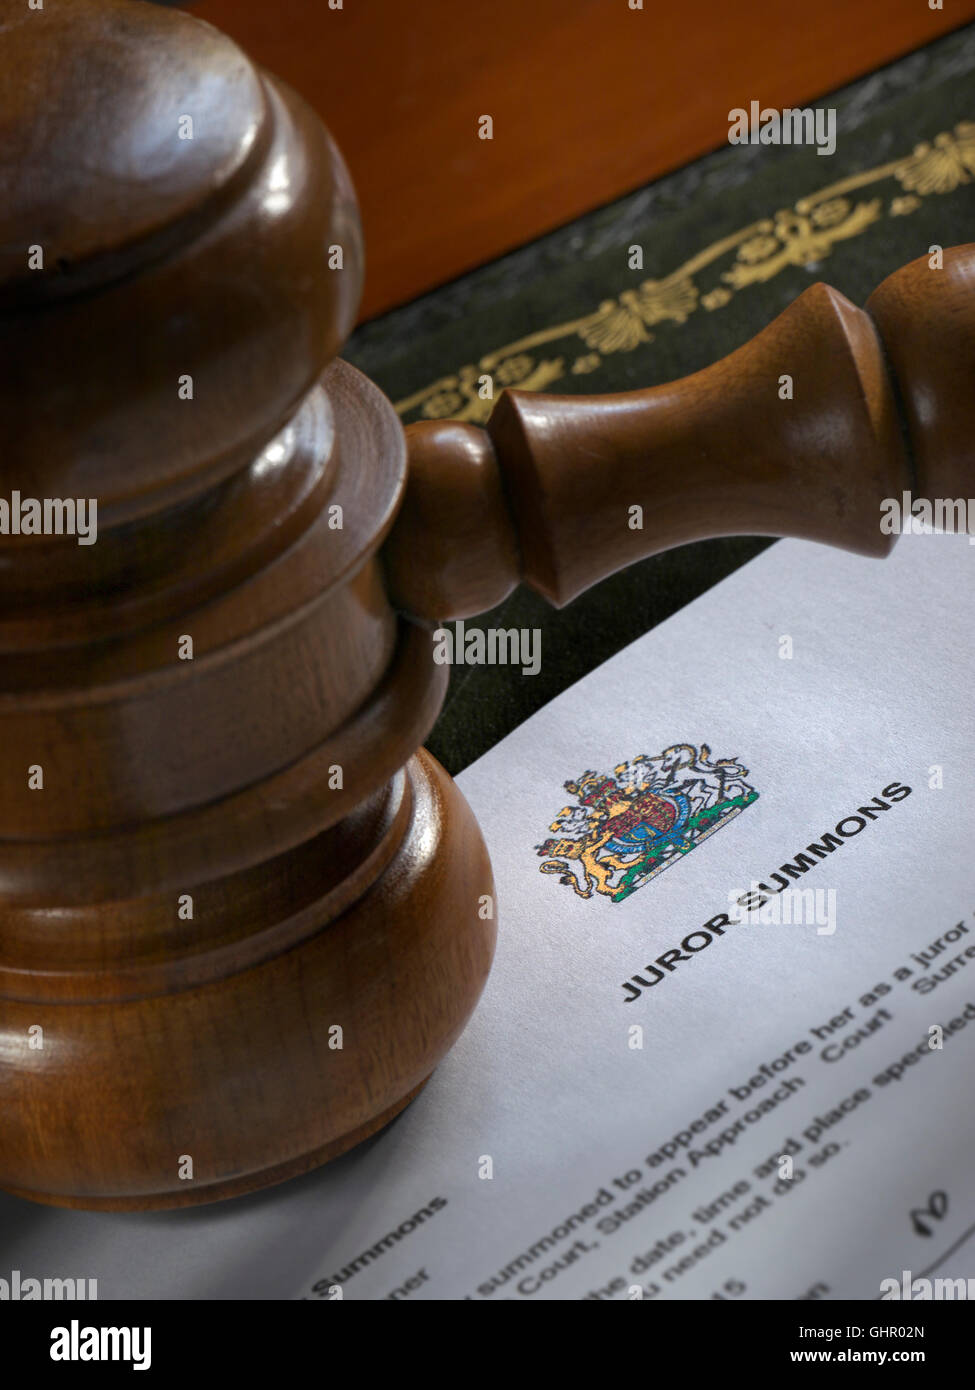 JUROR JURY SUMMONS Law Court Legal concept with Judges Gavel on Juror Summons letter Stock Photo